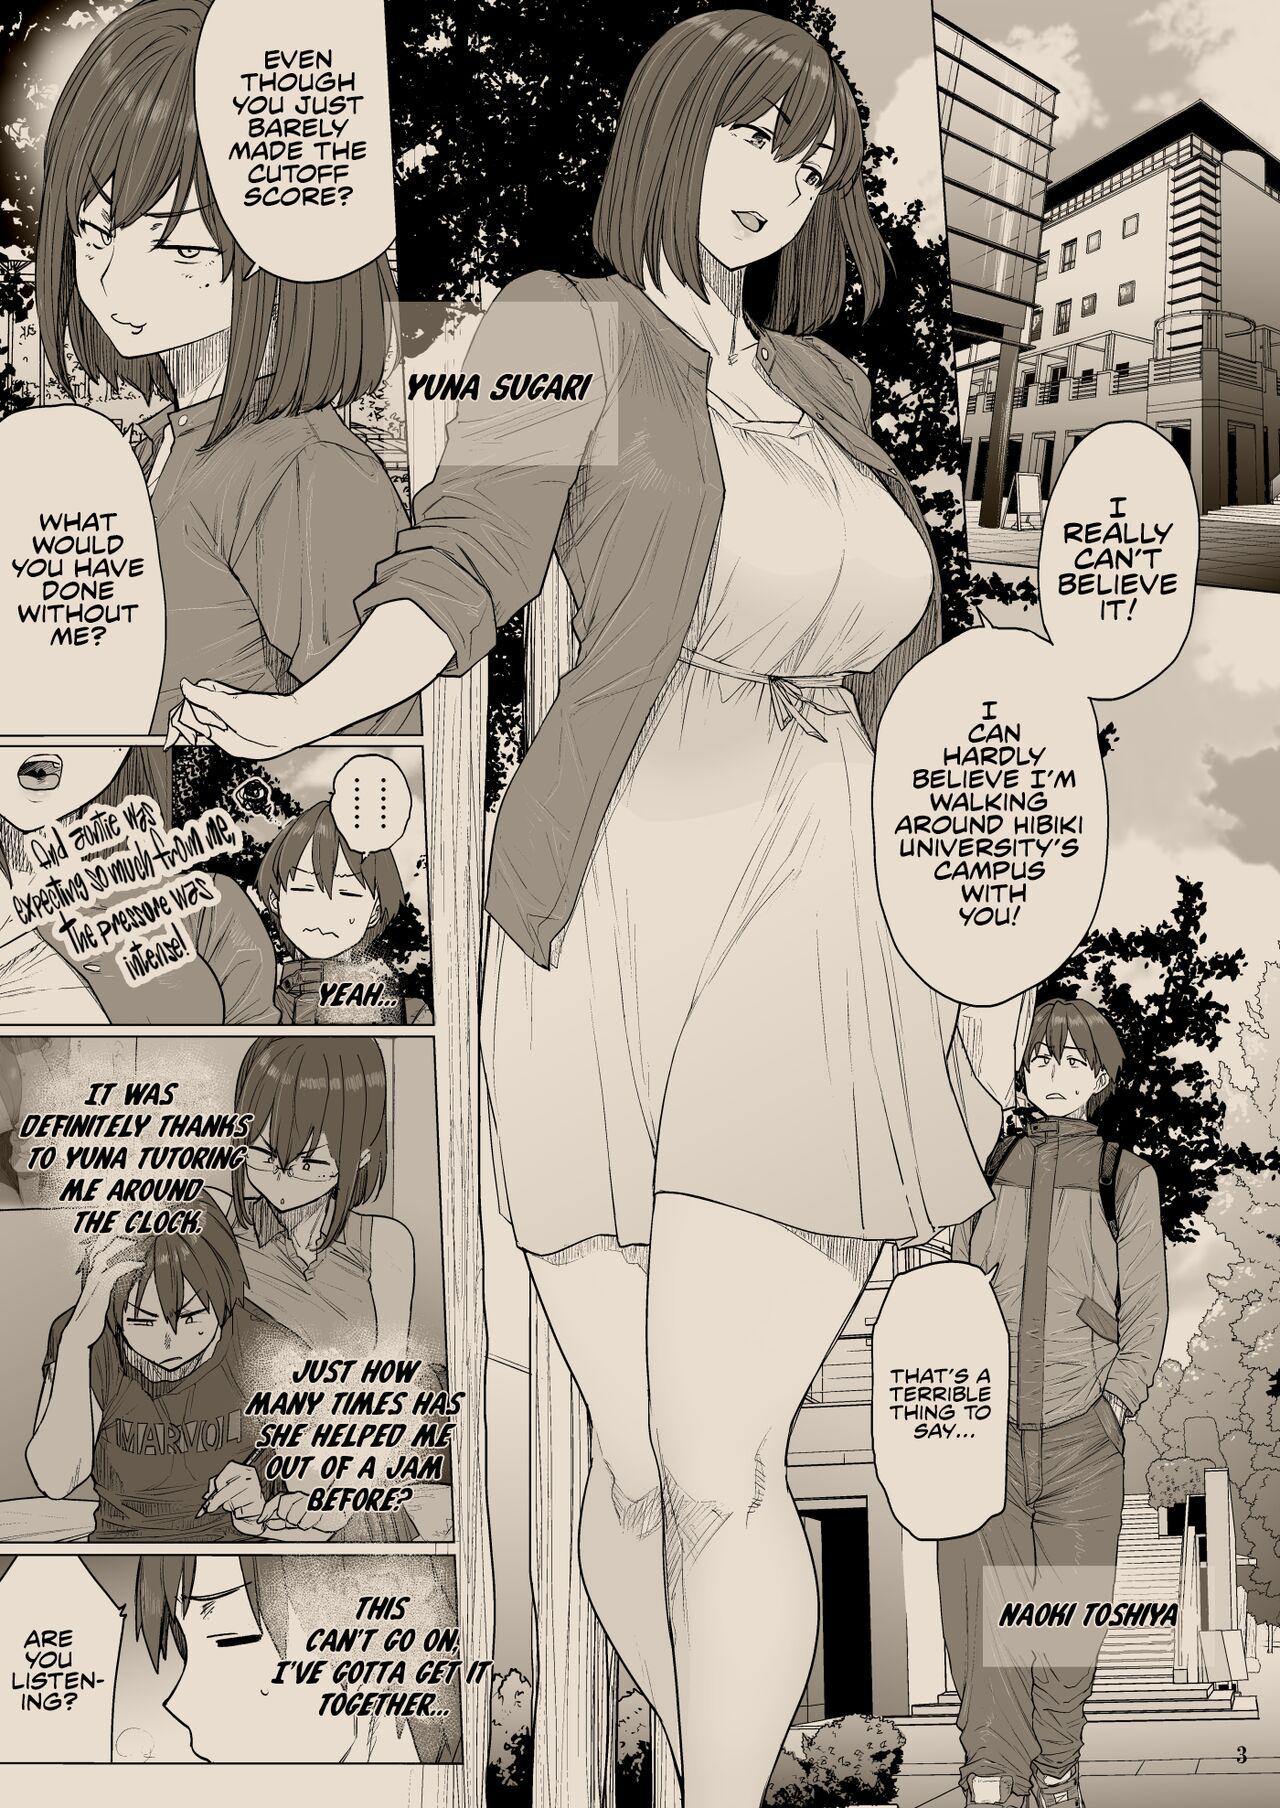 Curves B.S.S.² - My Smart, Beautiful Childhood Friend That I Loved First Became an Assistant of an Upperclassman’s Club and He Did Whatever He Pleased to Her - Original Pigtails - Page 2